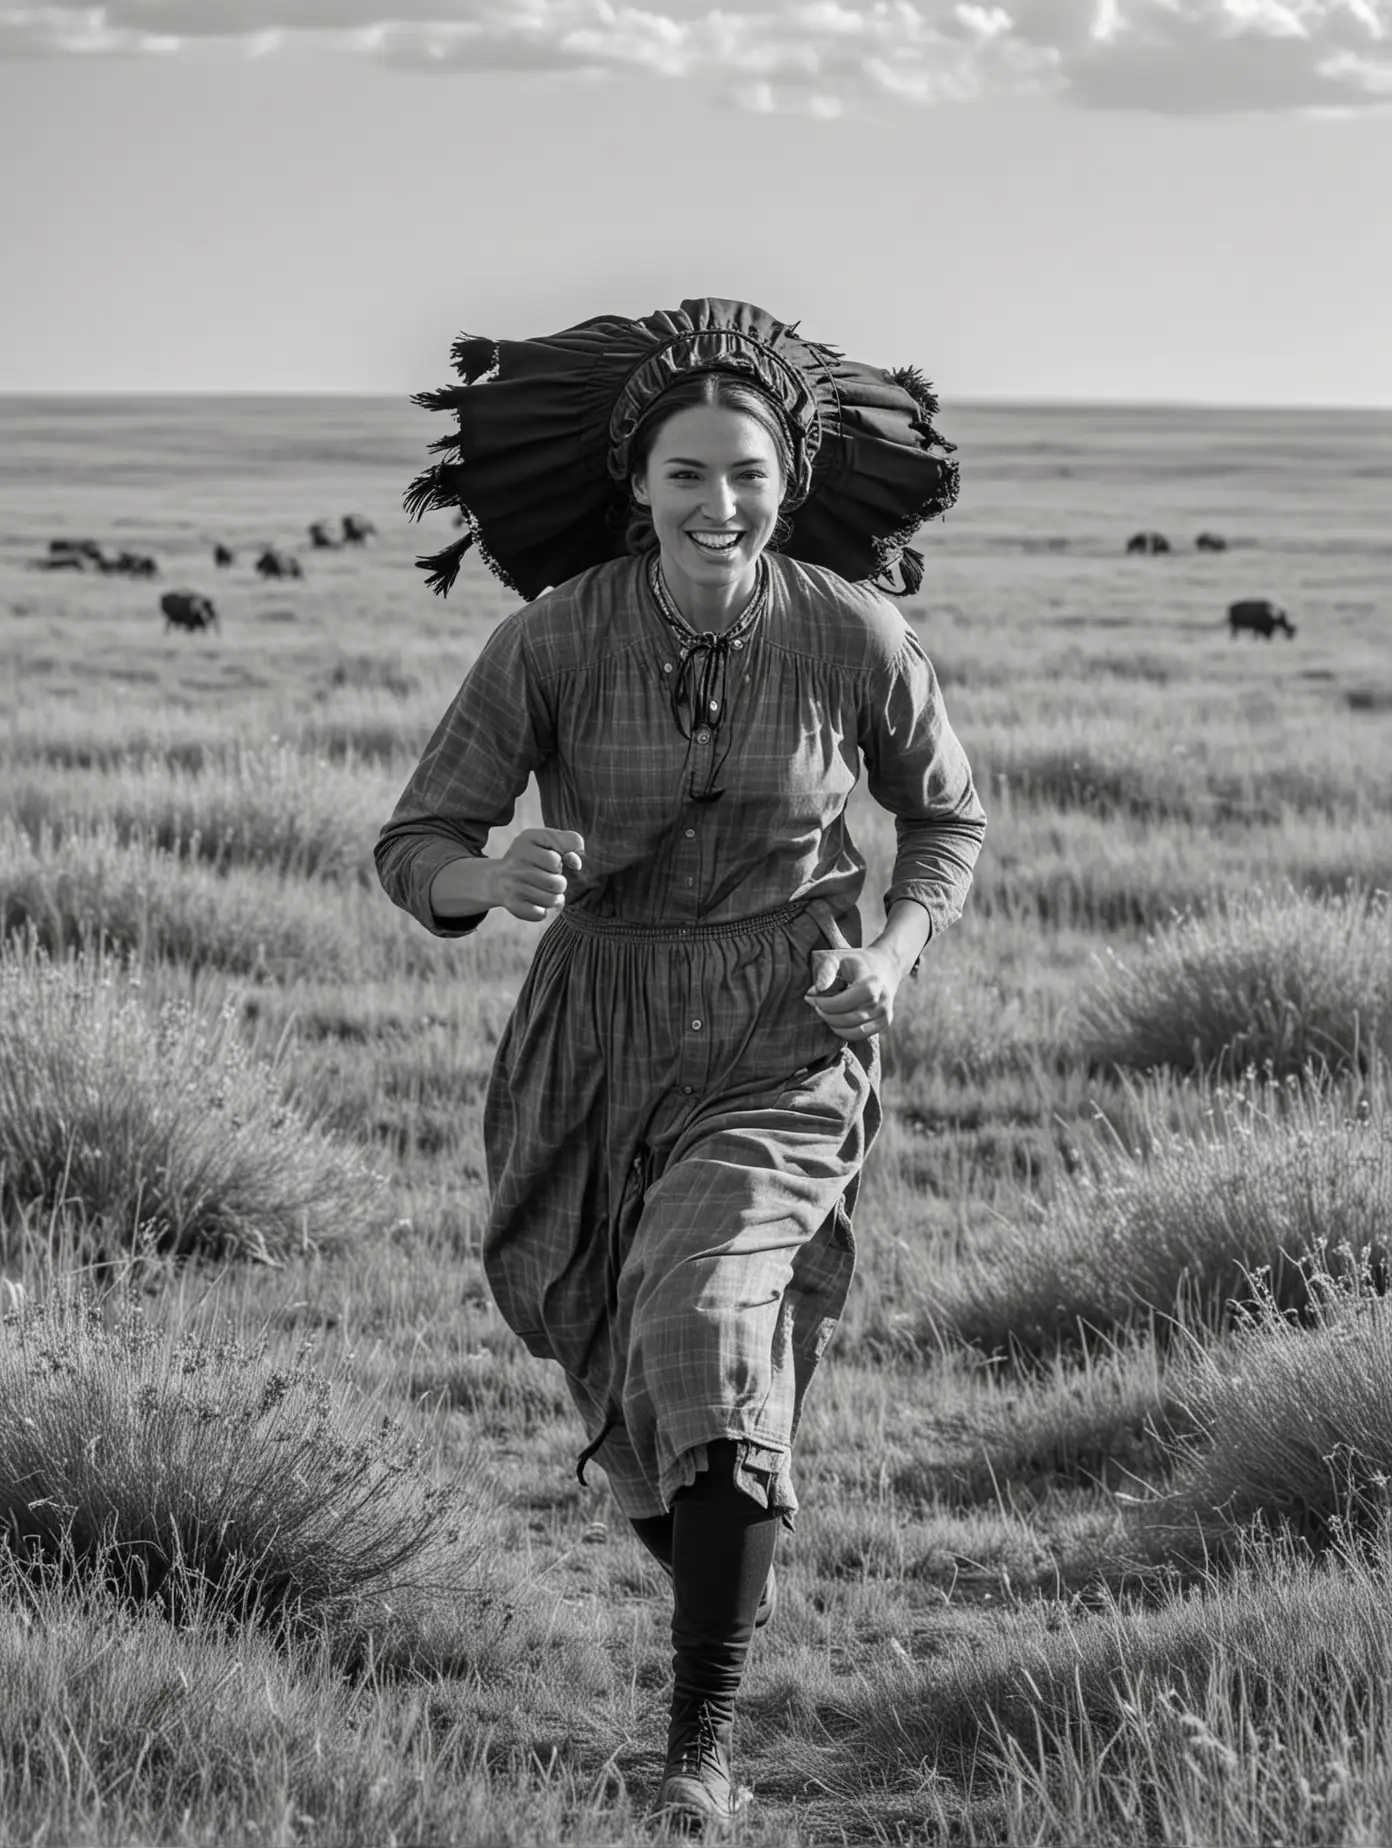 Pioneer Woman Running with Buffalo in Vintage Prairie Landscape